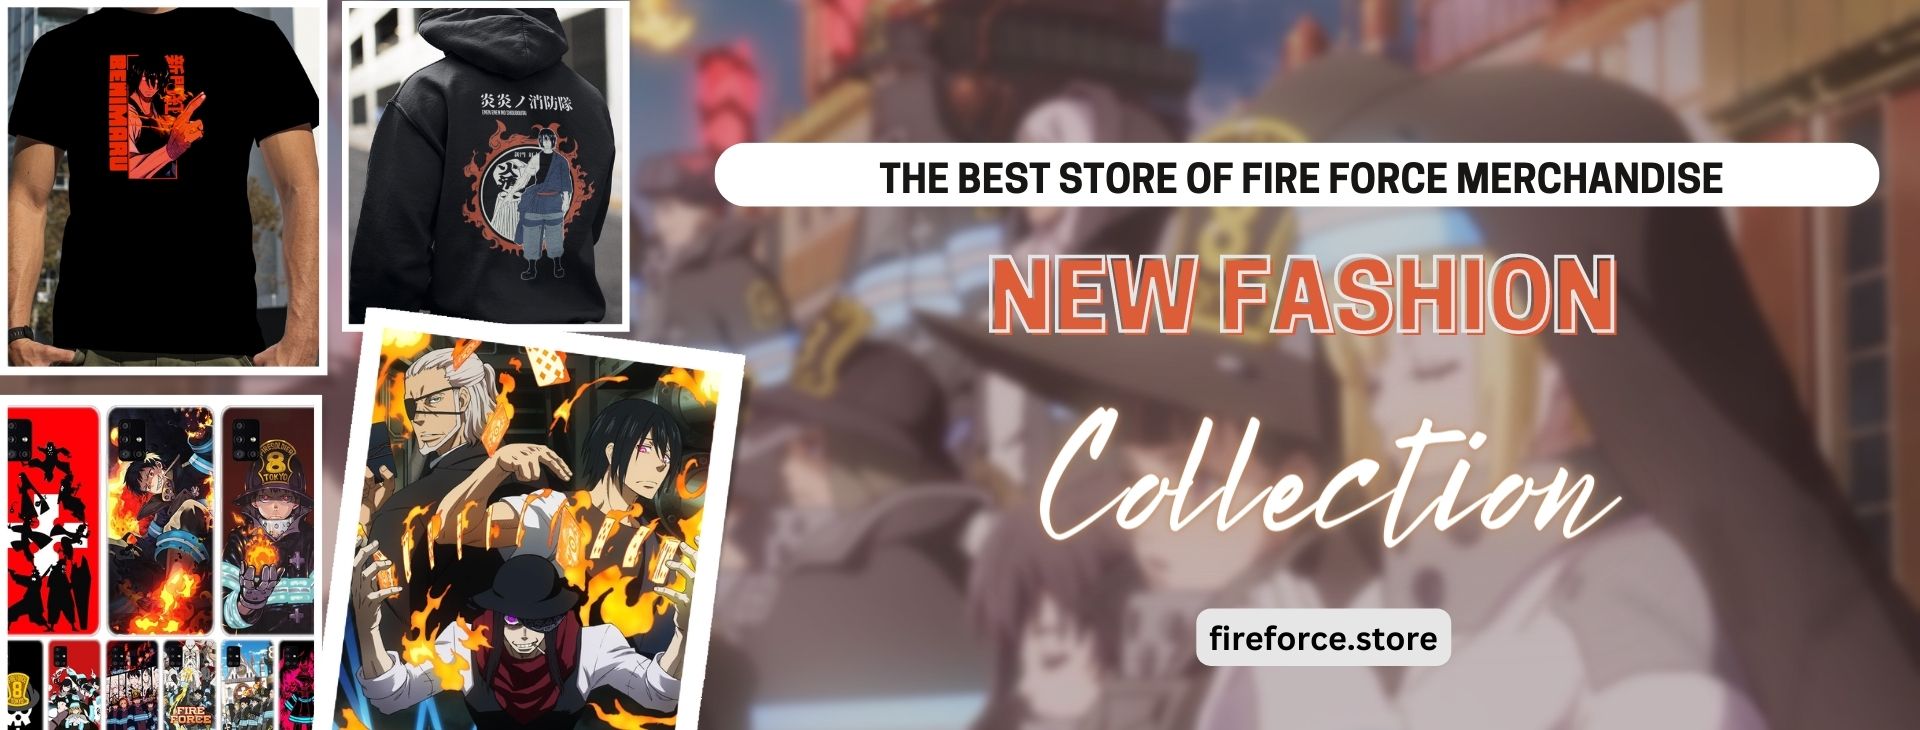 - Fire Force Store